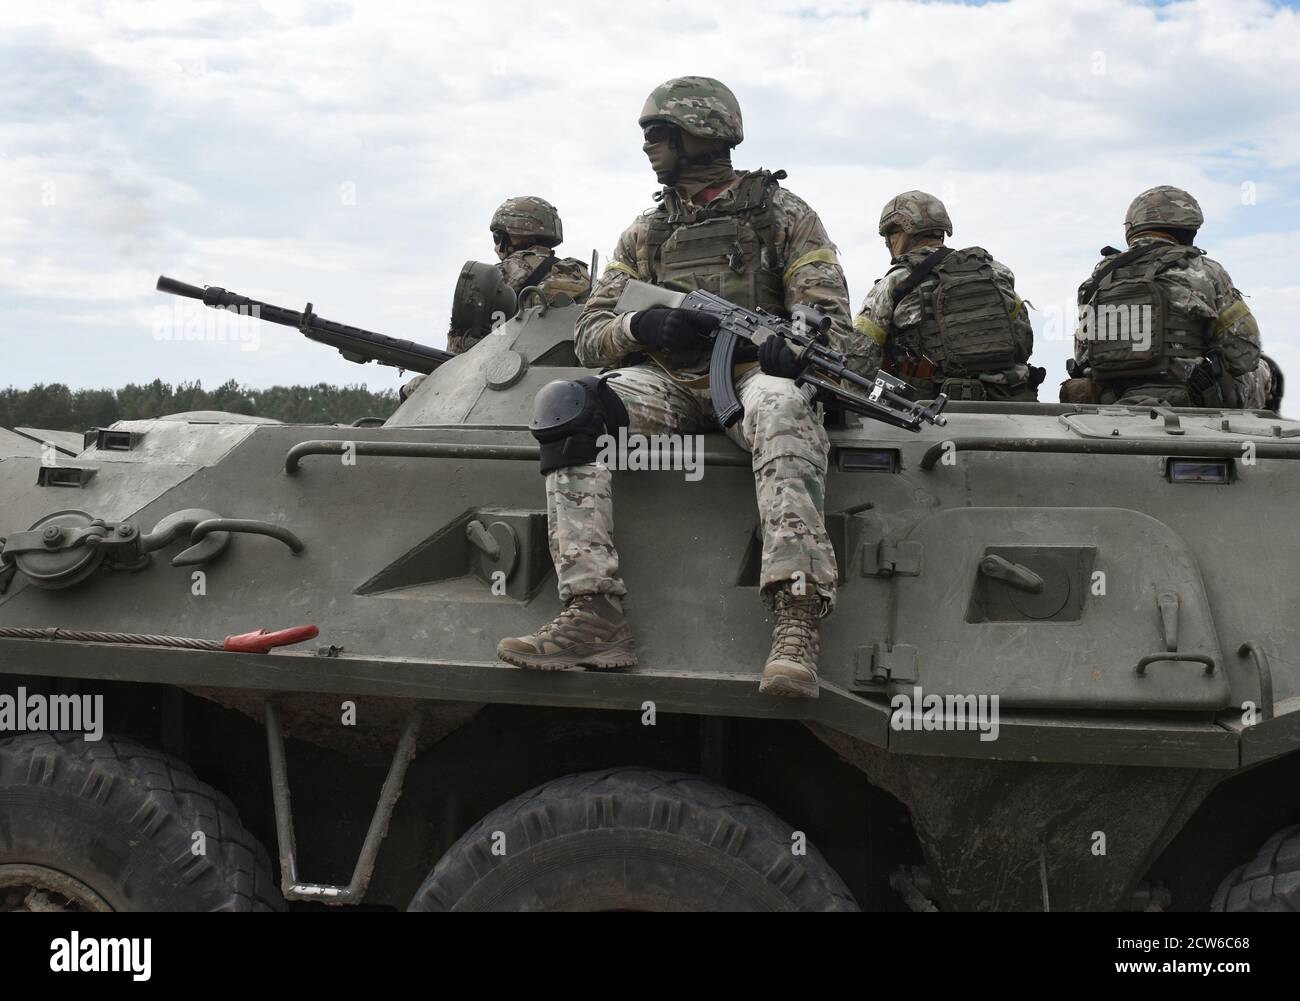 Soldiers with machine guns on an armored personnel carrier. Post-Soviet conflicts. Caucasus war Stock Photo